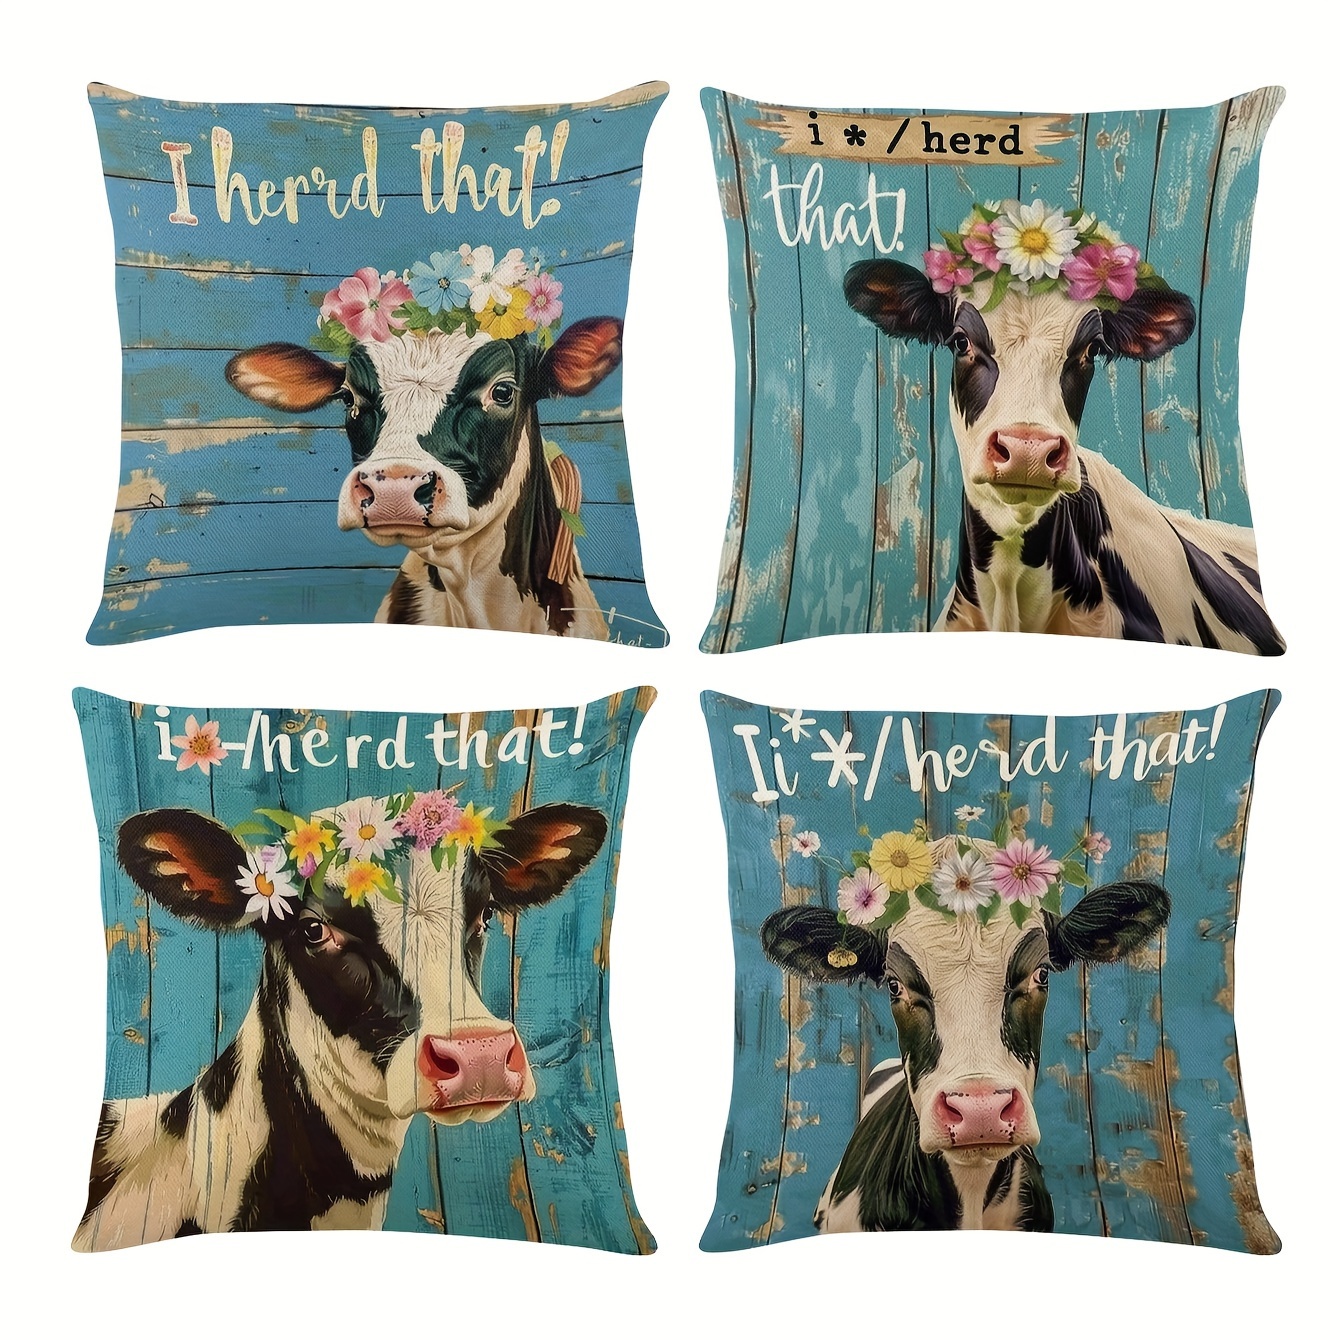 

4-pack Country Rustic Farm Cow Throw Pillow Covers, Soft Linen 45x45cm, Machine Washable, Zippered, Decorative Knit Fabric Cushion Cases For Various Room Types - Cozy, Durable & Breathable (no Insert)